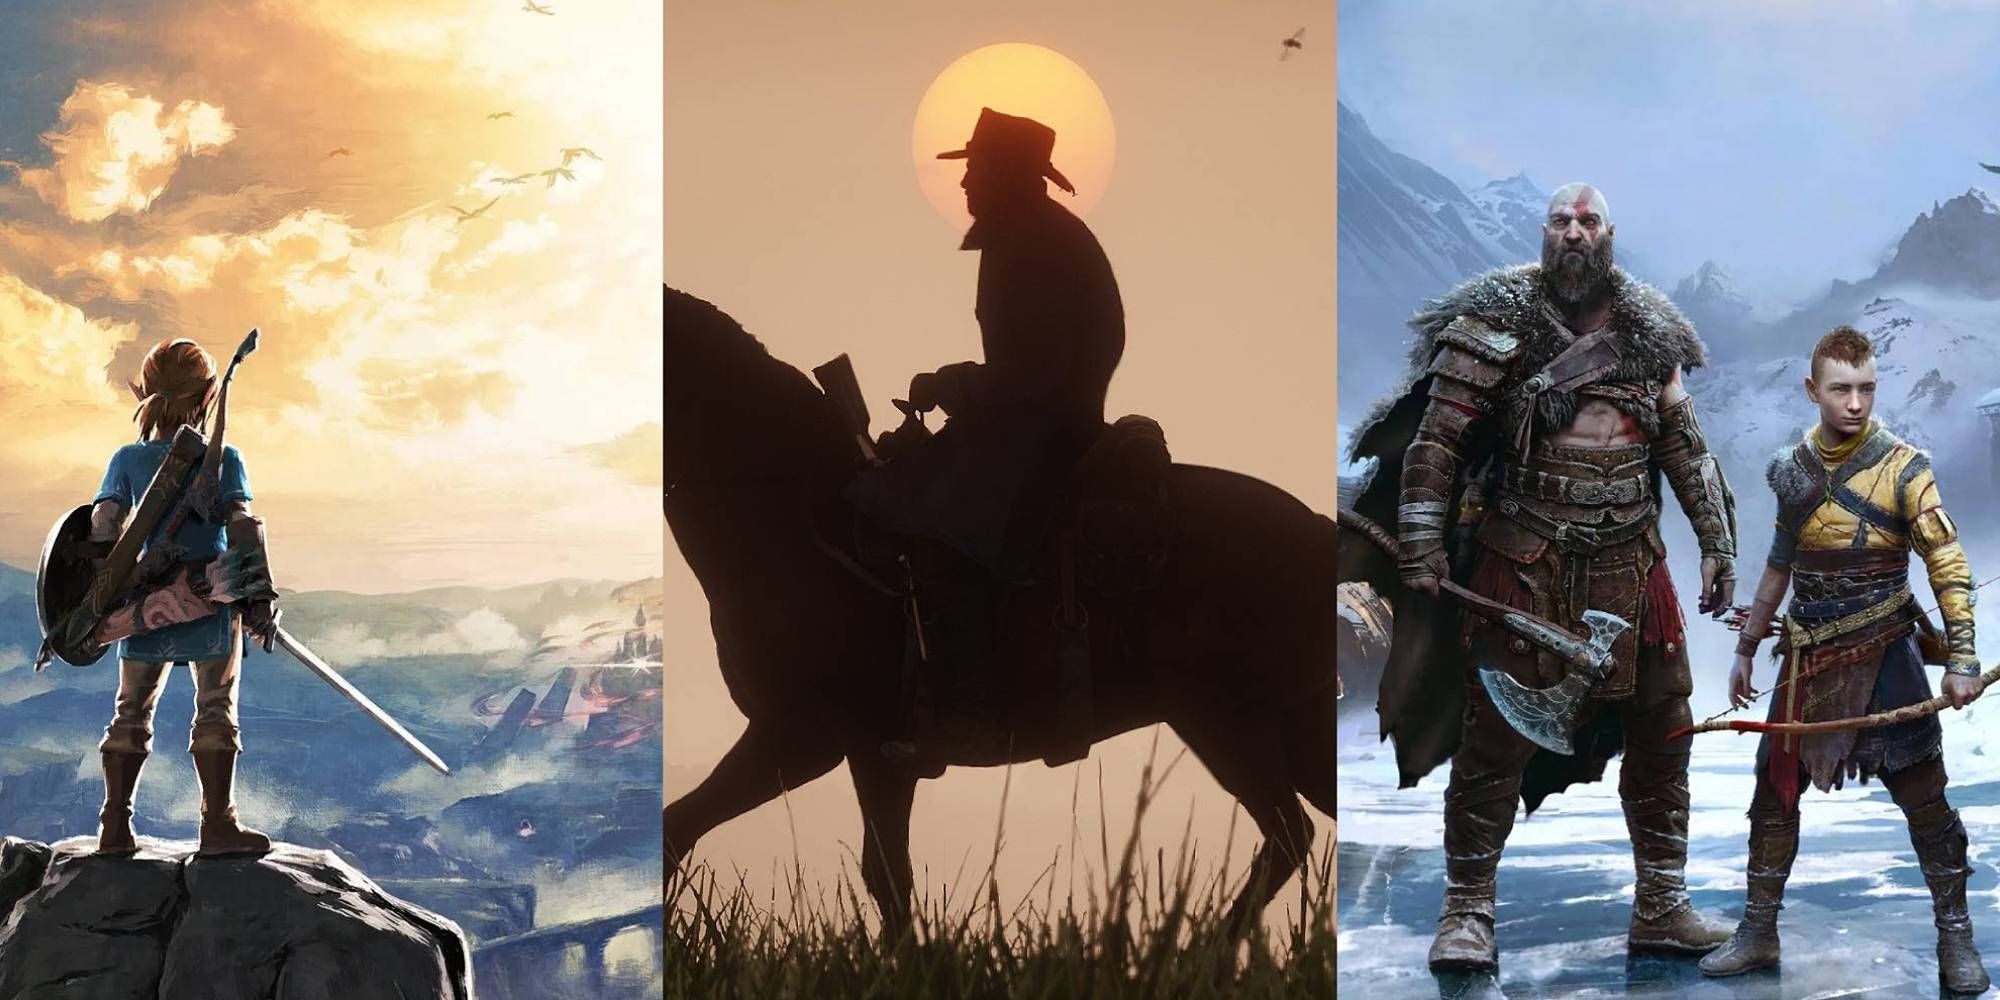 A collage of images featuring Link from Legend Of Zelda, Arthur from Red Dead Redemption 2 and Kratos/Atreus of God Of War